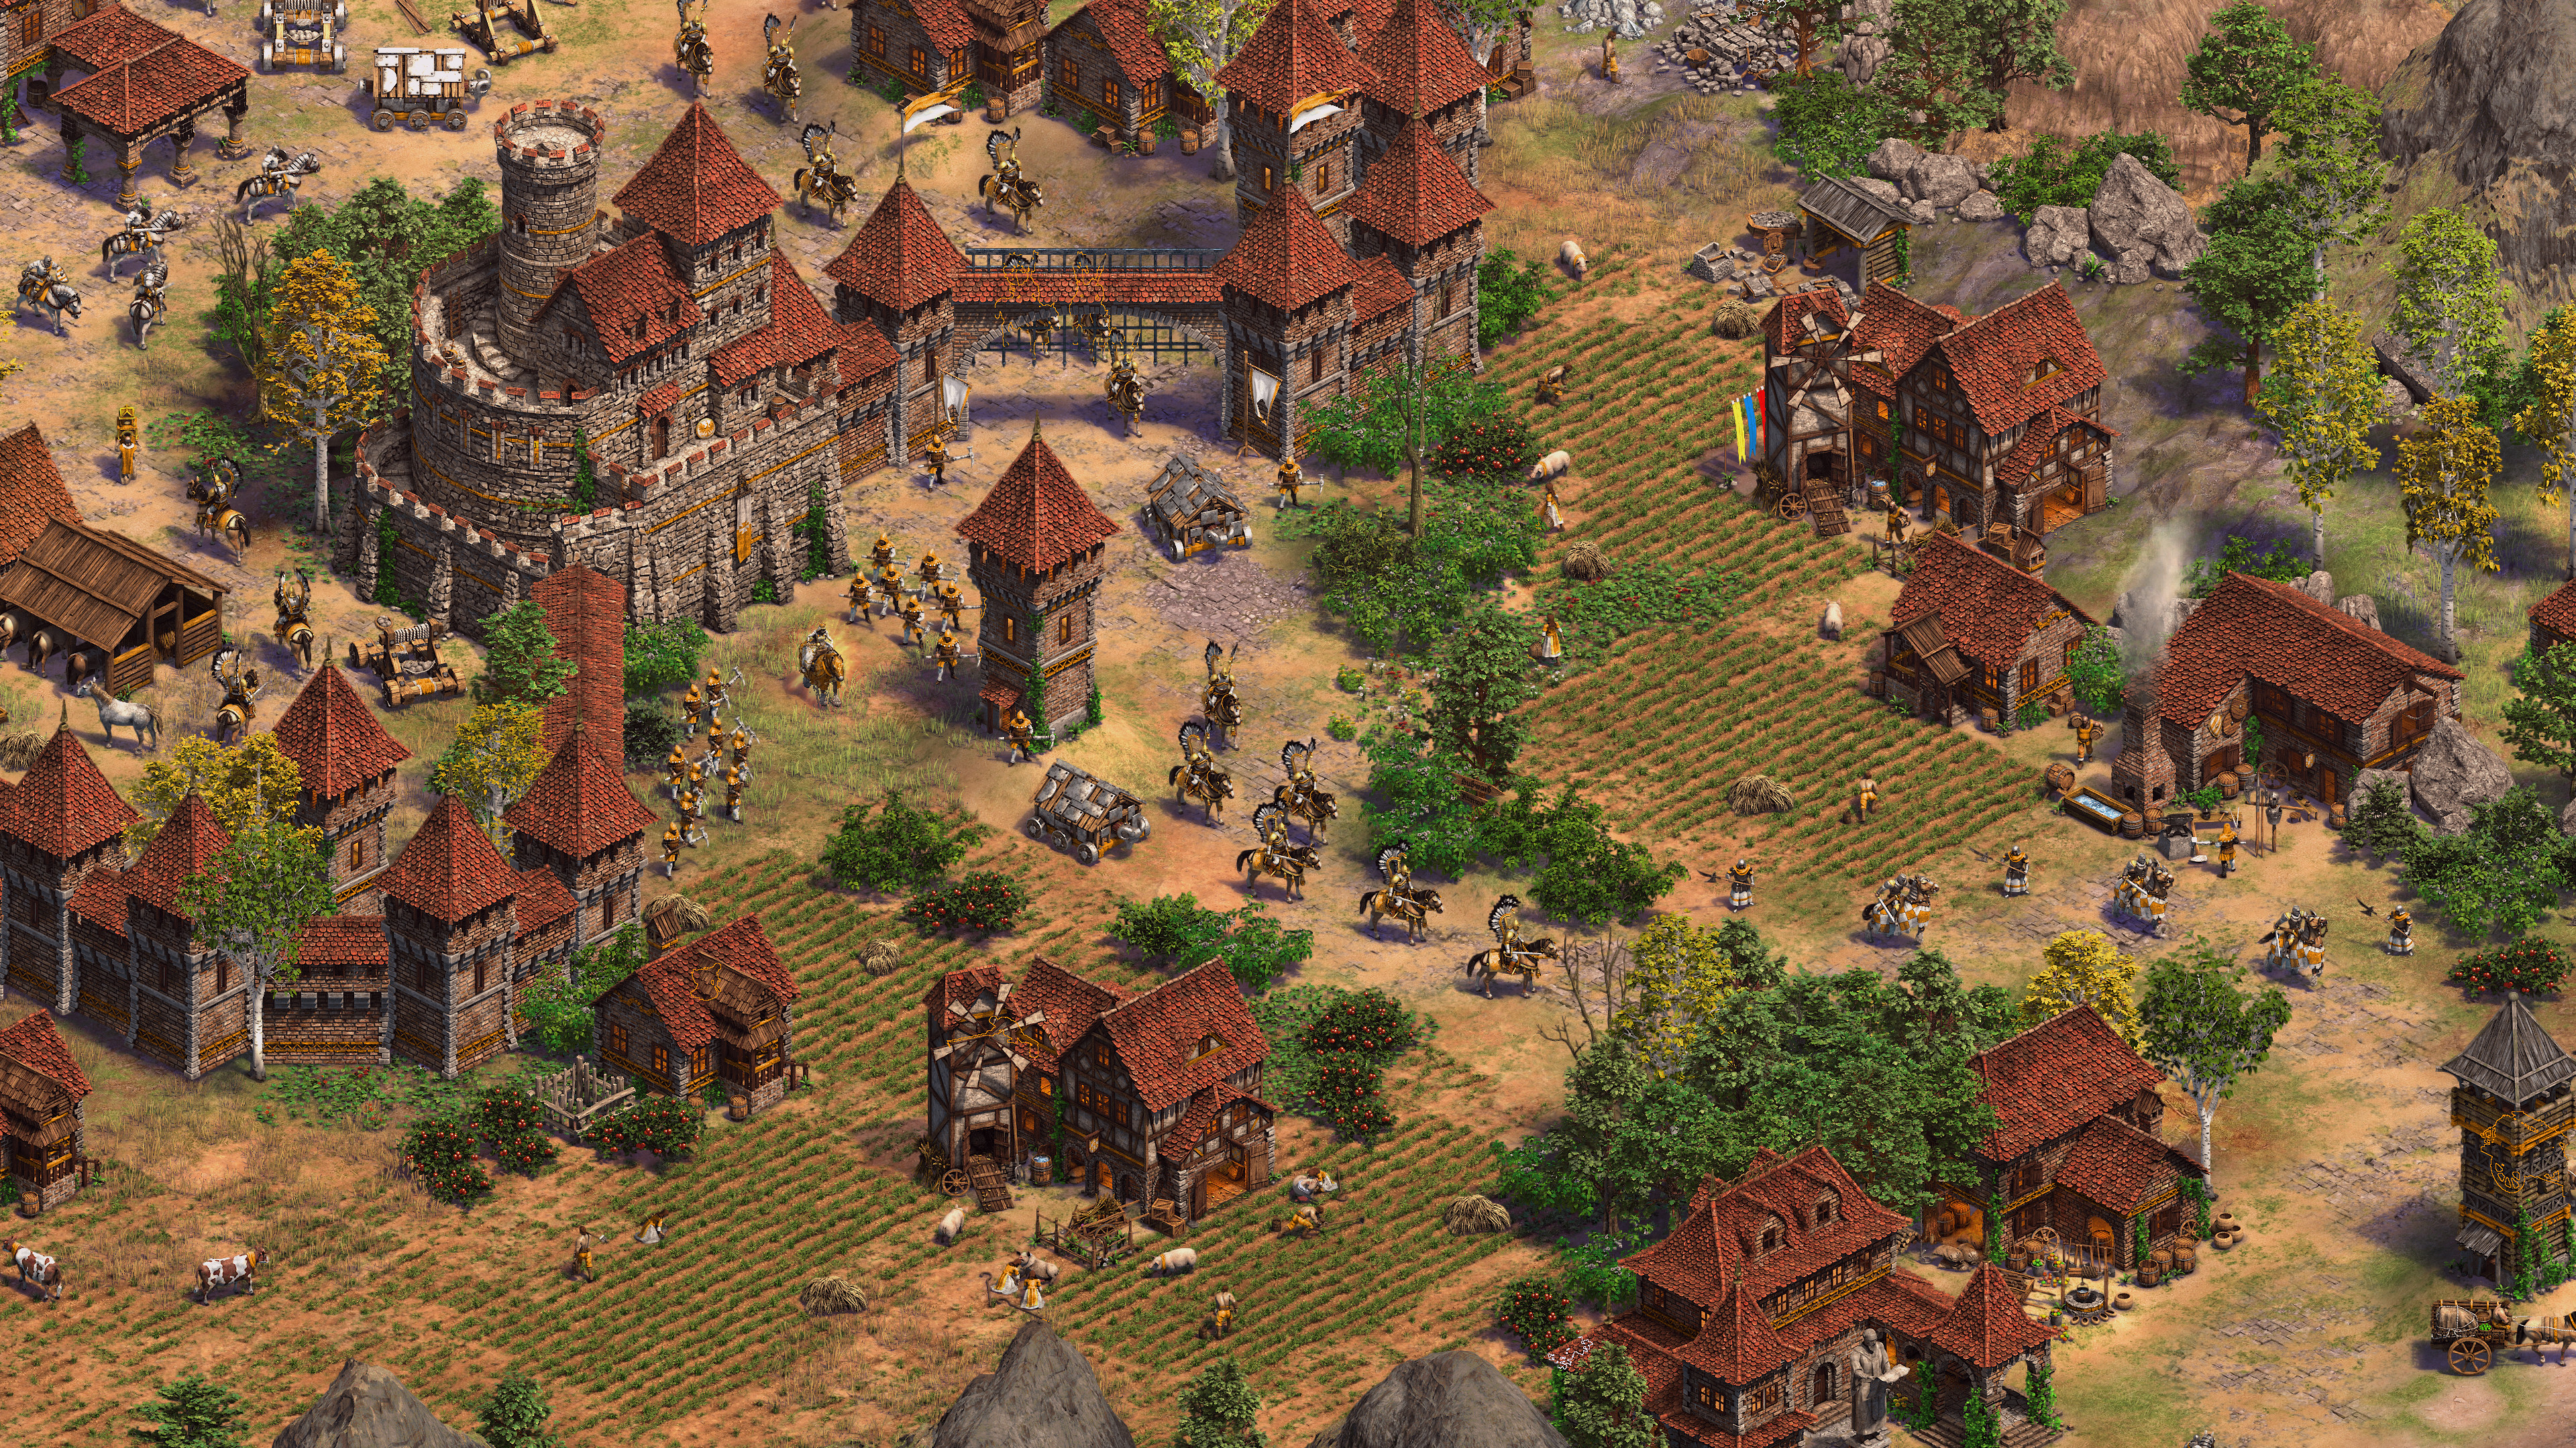 Age of Empires II: Definitive Edition - Dawn of the Dukes Free Download for PC